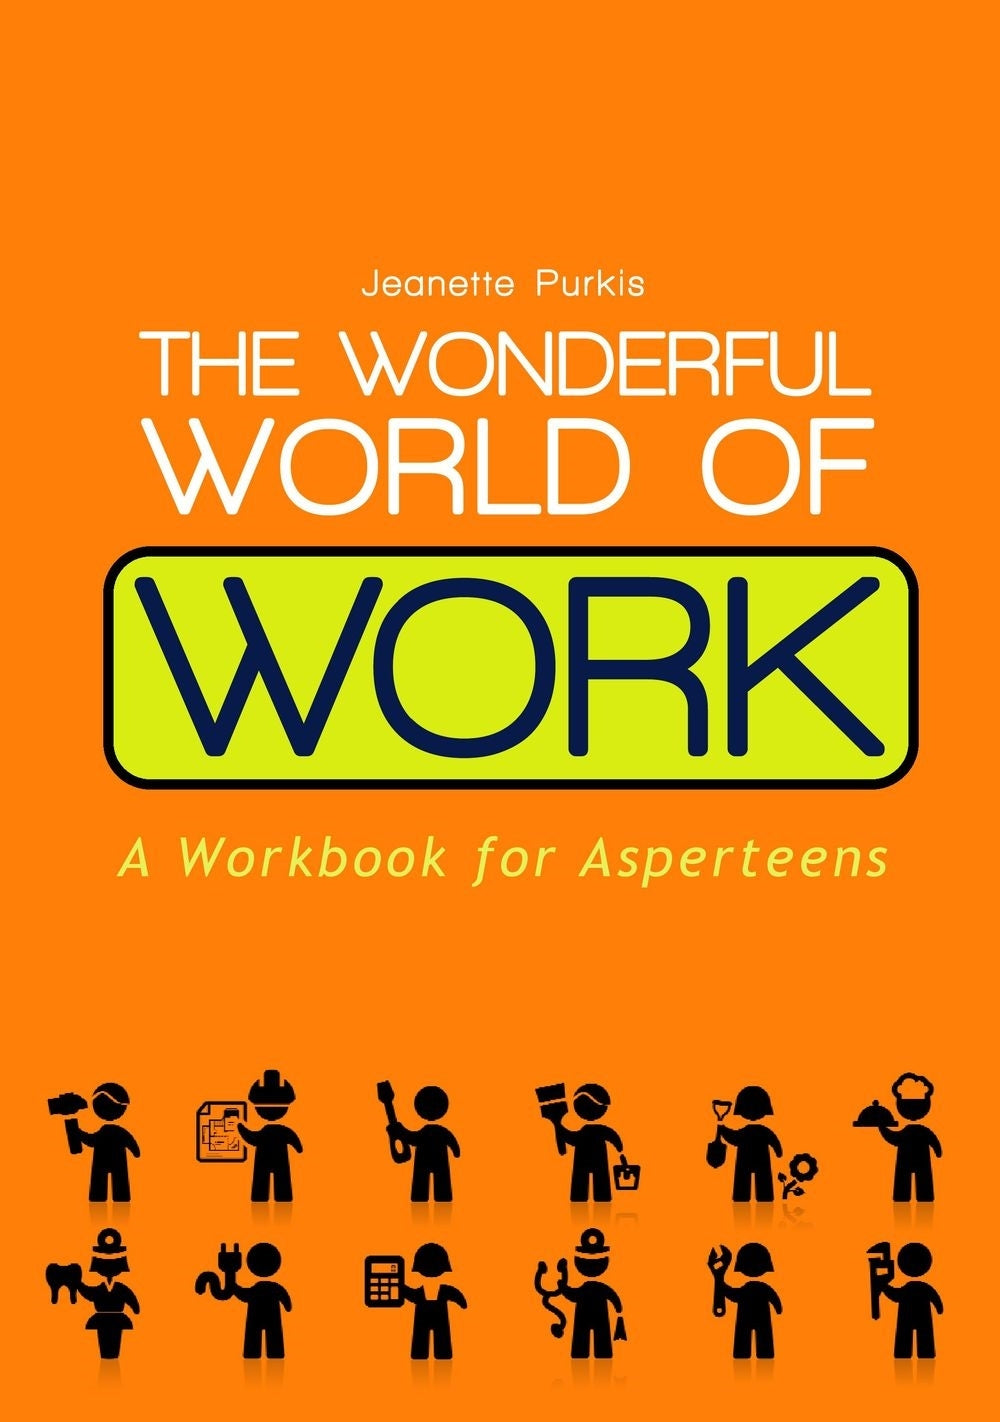 The Wonderful World of Work by Andrew Hore, Yenn Purkis